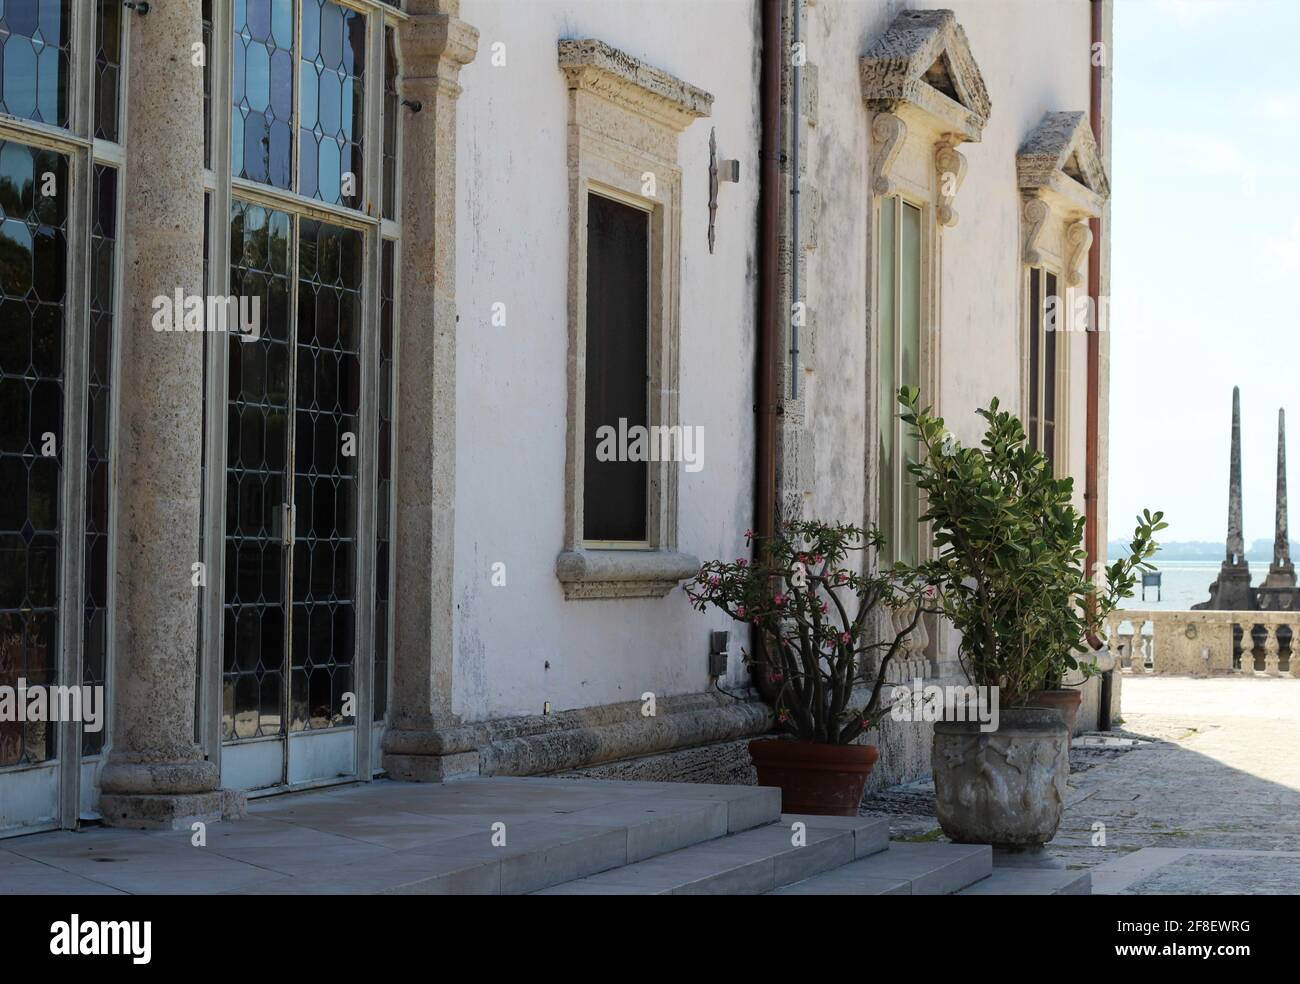 Side angle view of The Vizcaya Museum and Garden. Pots in plants and shadows scenery. Stock Photo